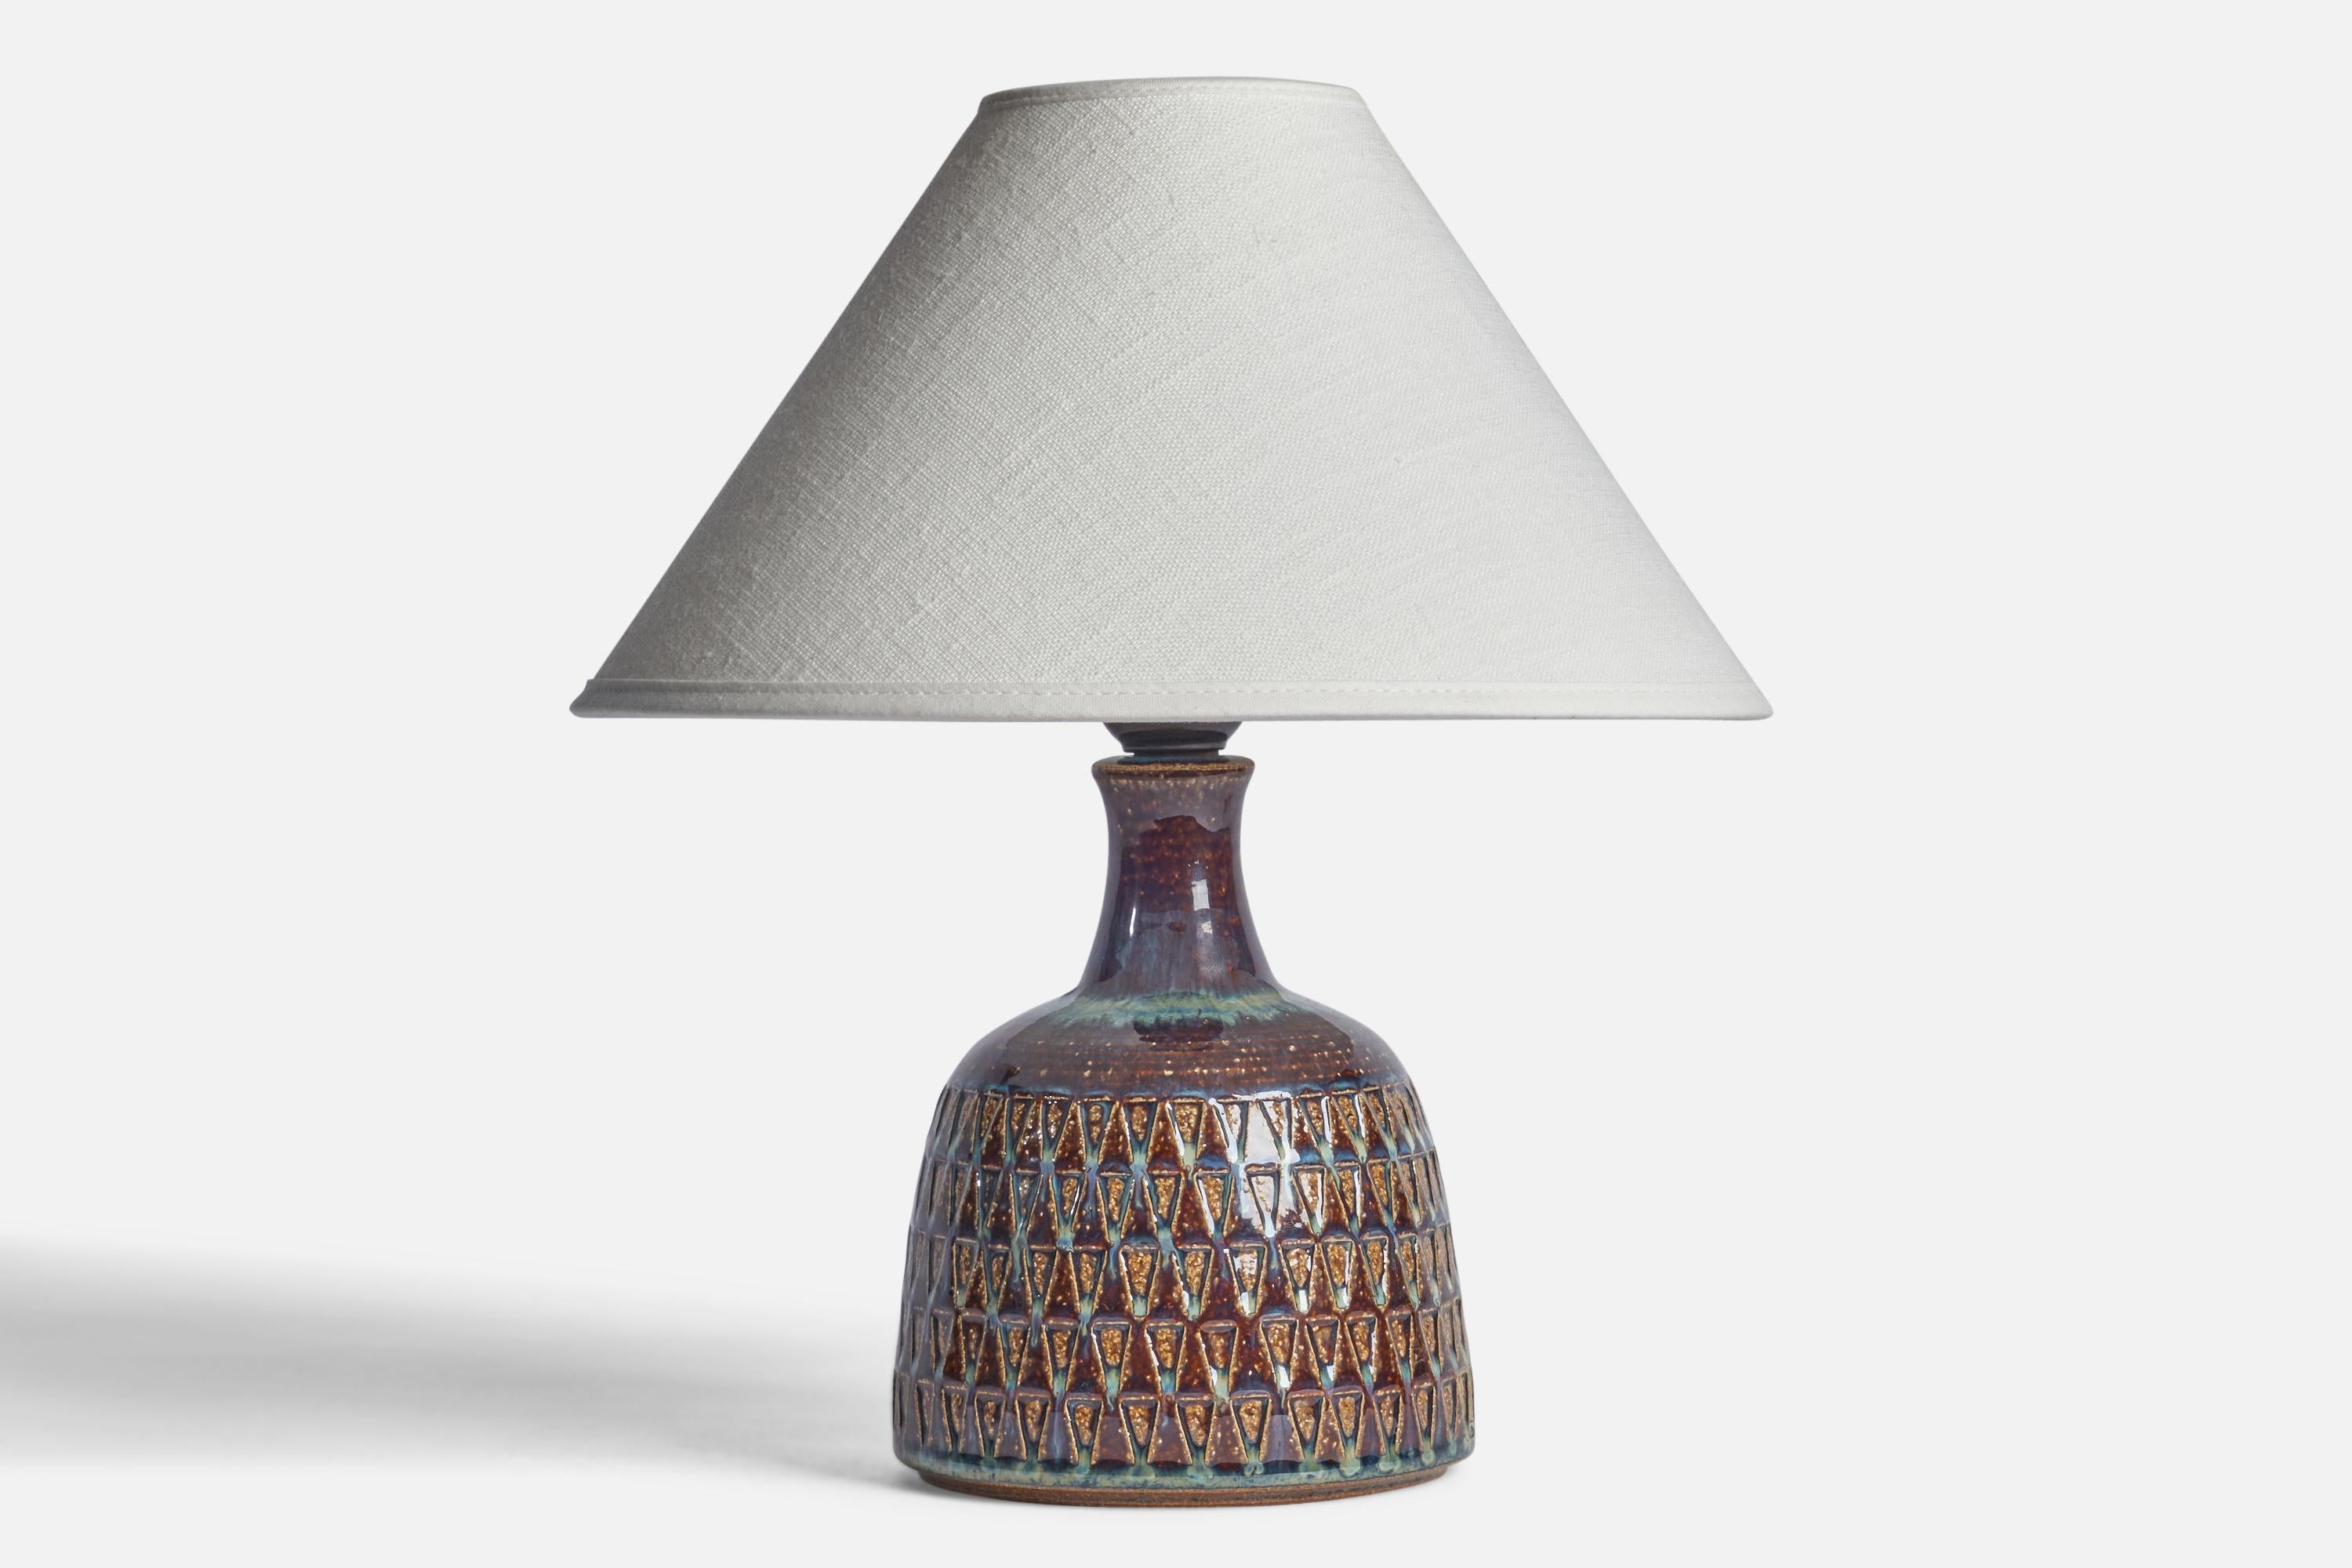 A blue and brown-glazed stoneware table lamp designed and produced by Søholm, Bornholm, Denmark, 1960s.

Dimensions of Lamp (inches): 8.5” H x 5” Diameter
Dimensions of Shade (inches): 2.5” Top Diameter x 10” Bottom Diameter x 5.5